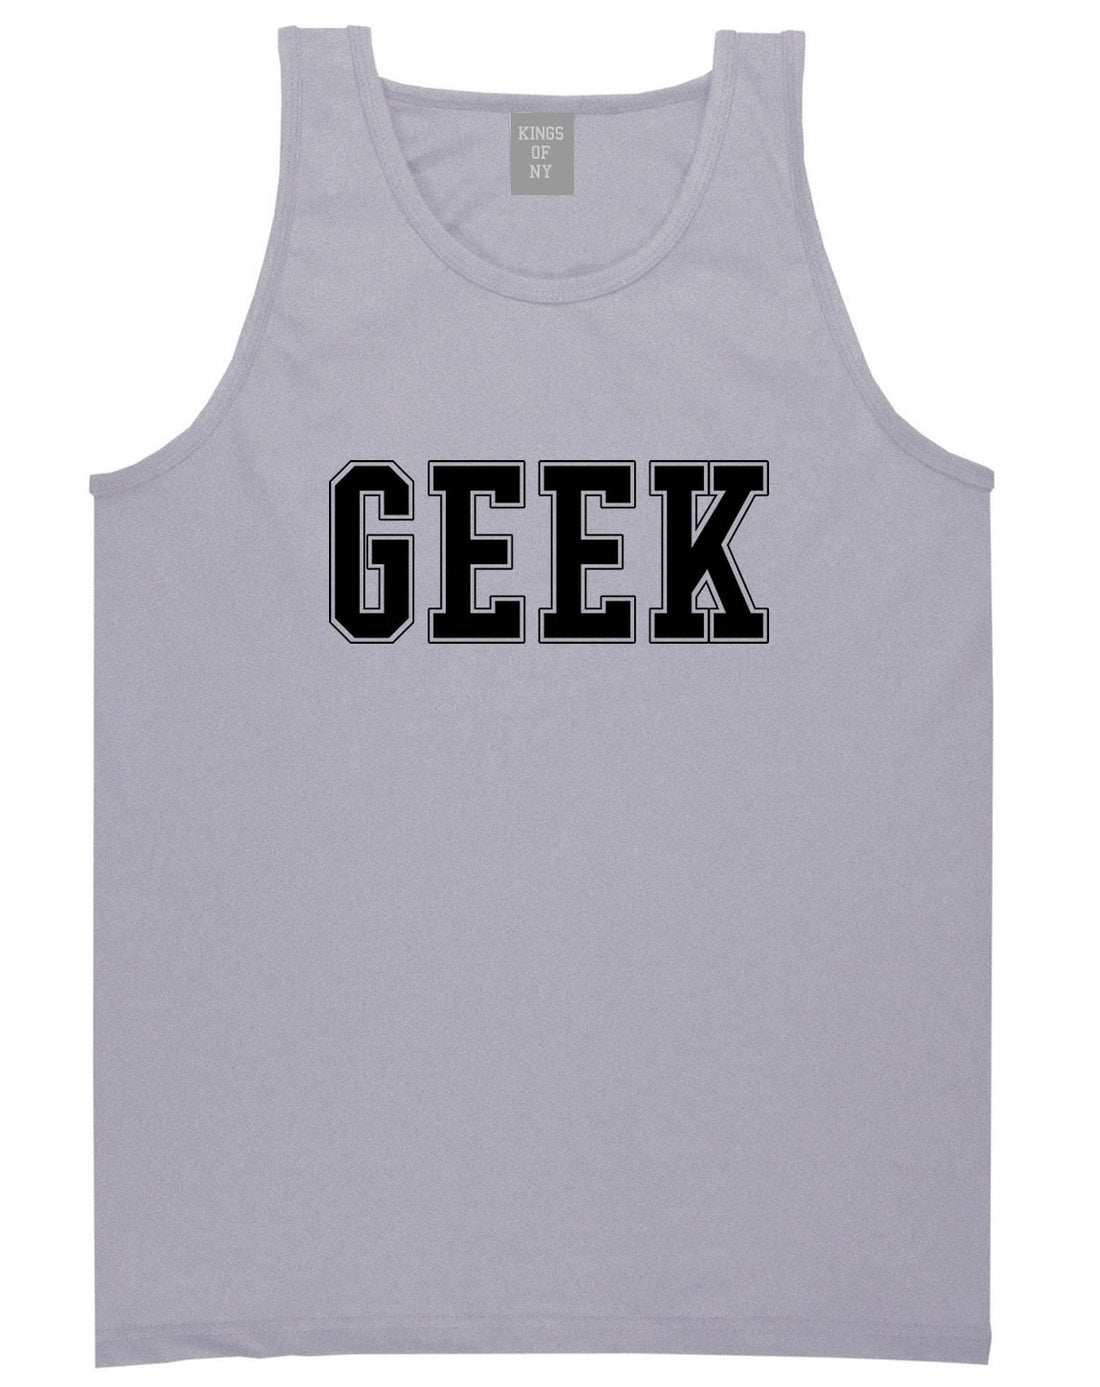 Geek College Style Tank Top in Grey By Kings Of NY